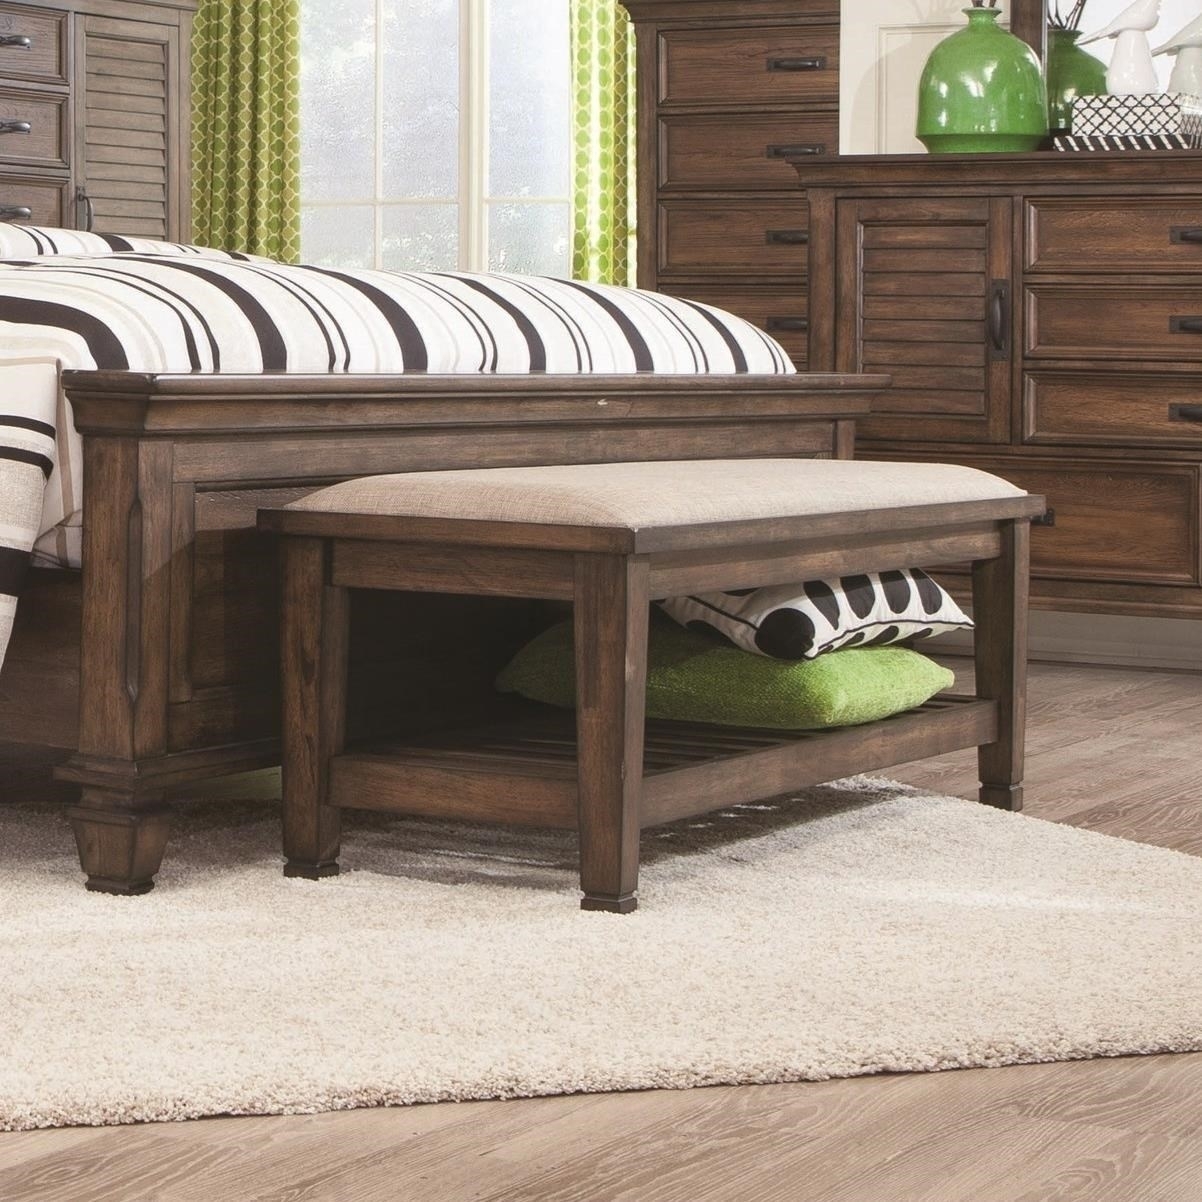 Transitional Style Wooden Bed Bench With Fabric Upholstered Seat, Brown- Saltoro Sherpi